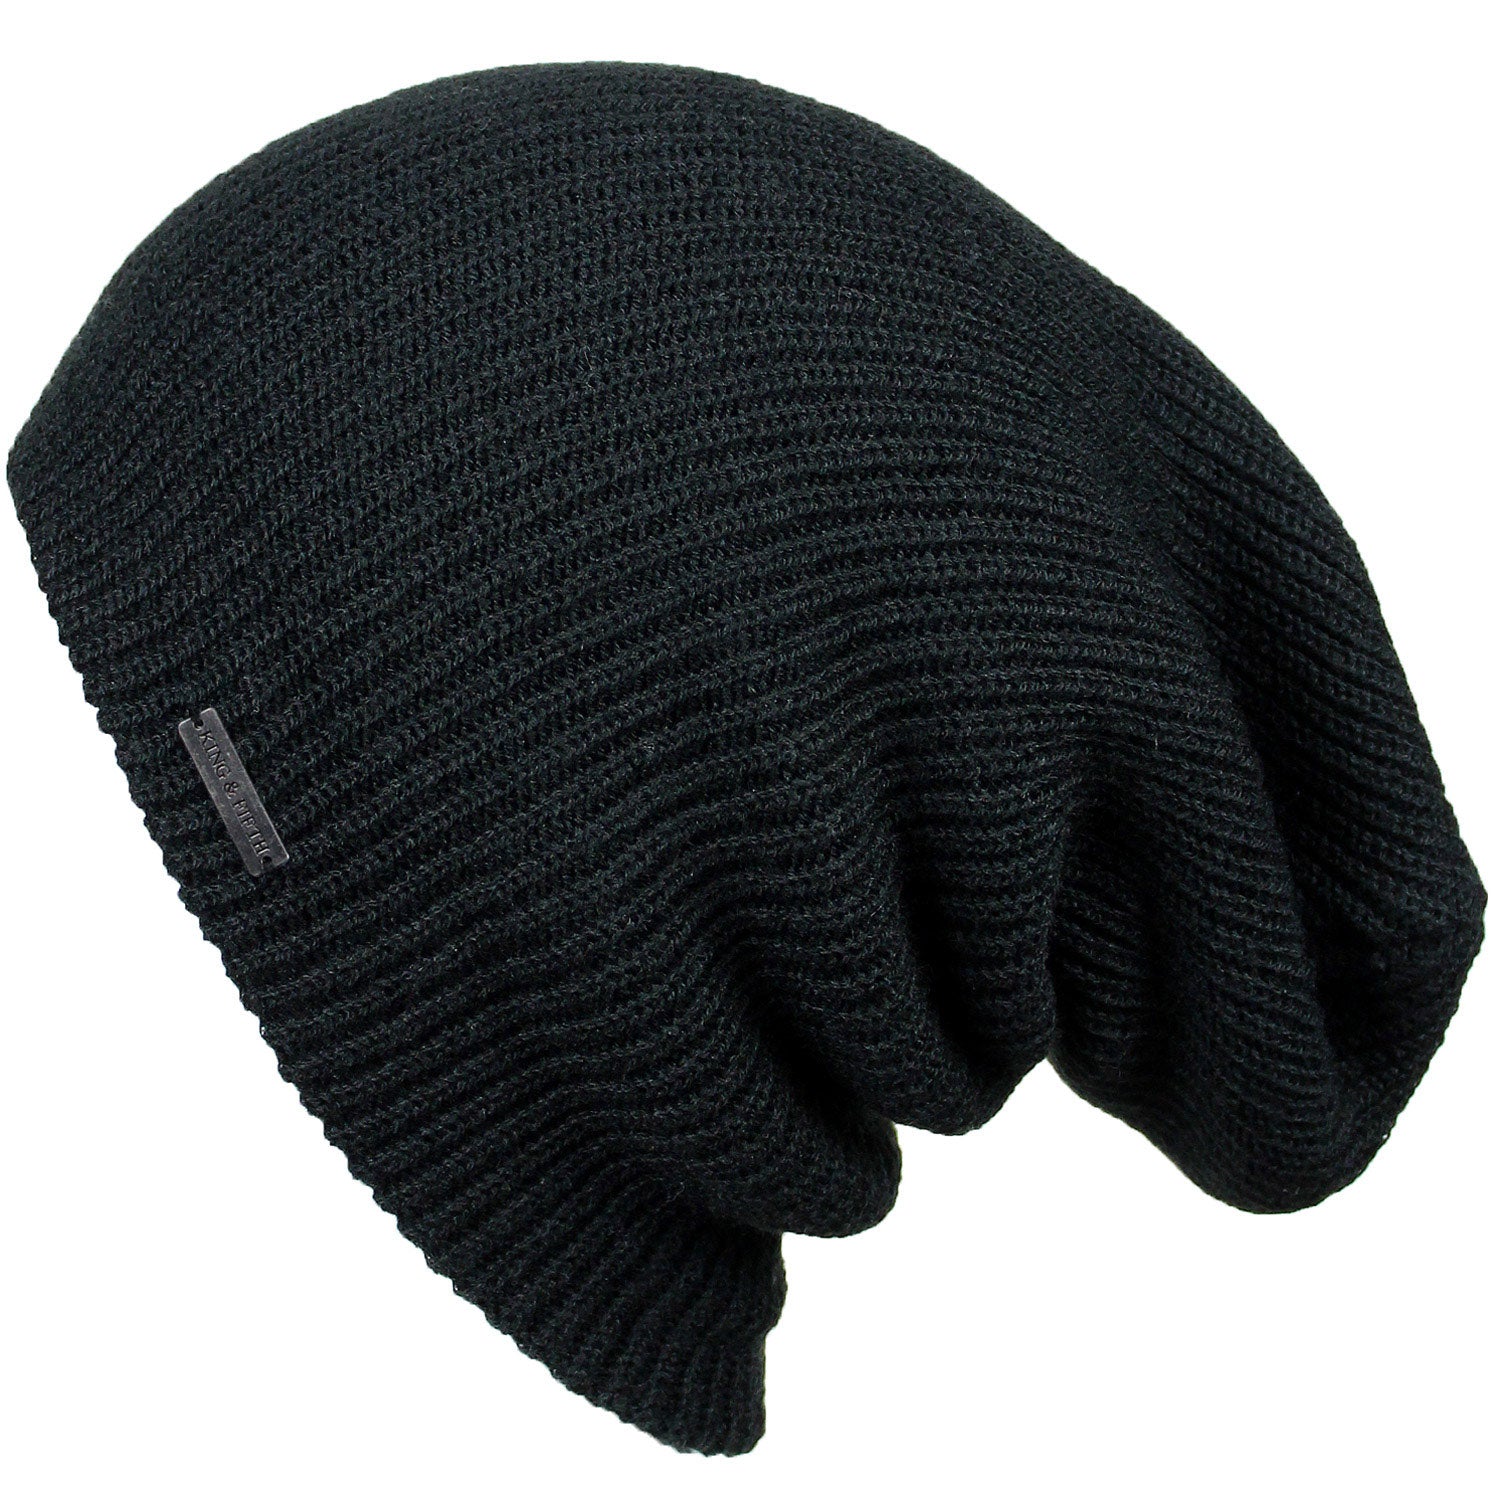 Mens Slouchy Beanie - The Forte XL, King and Fifth Supply Co.